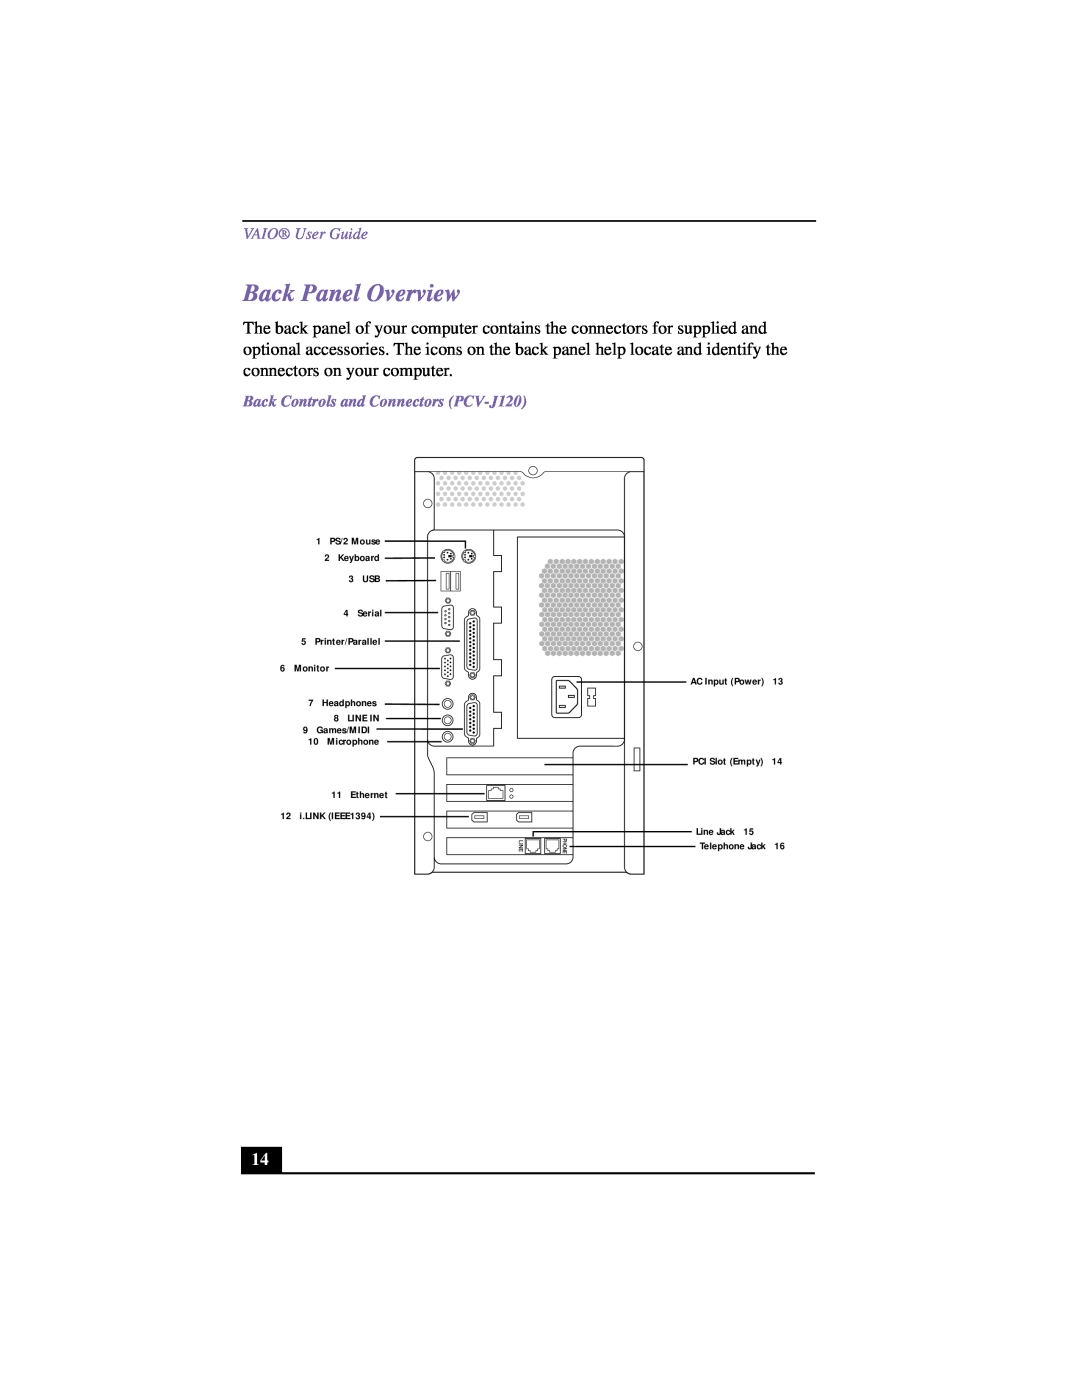 Sony manual Back Panel Overview, VAIO User Guide, Back Controls and Connectors PCV-J120 